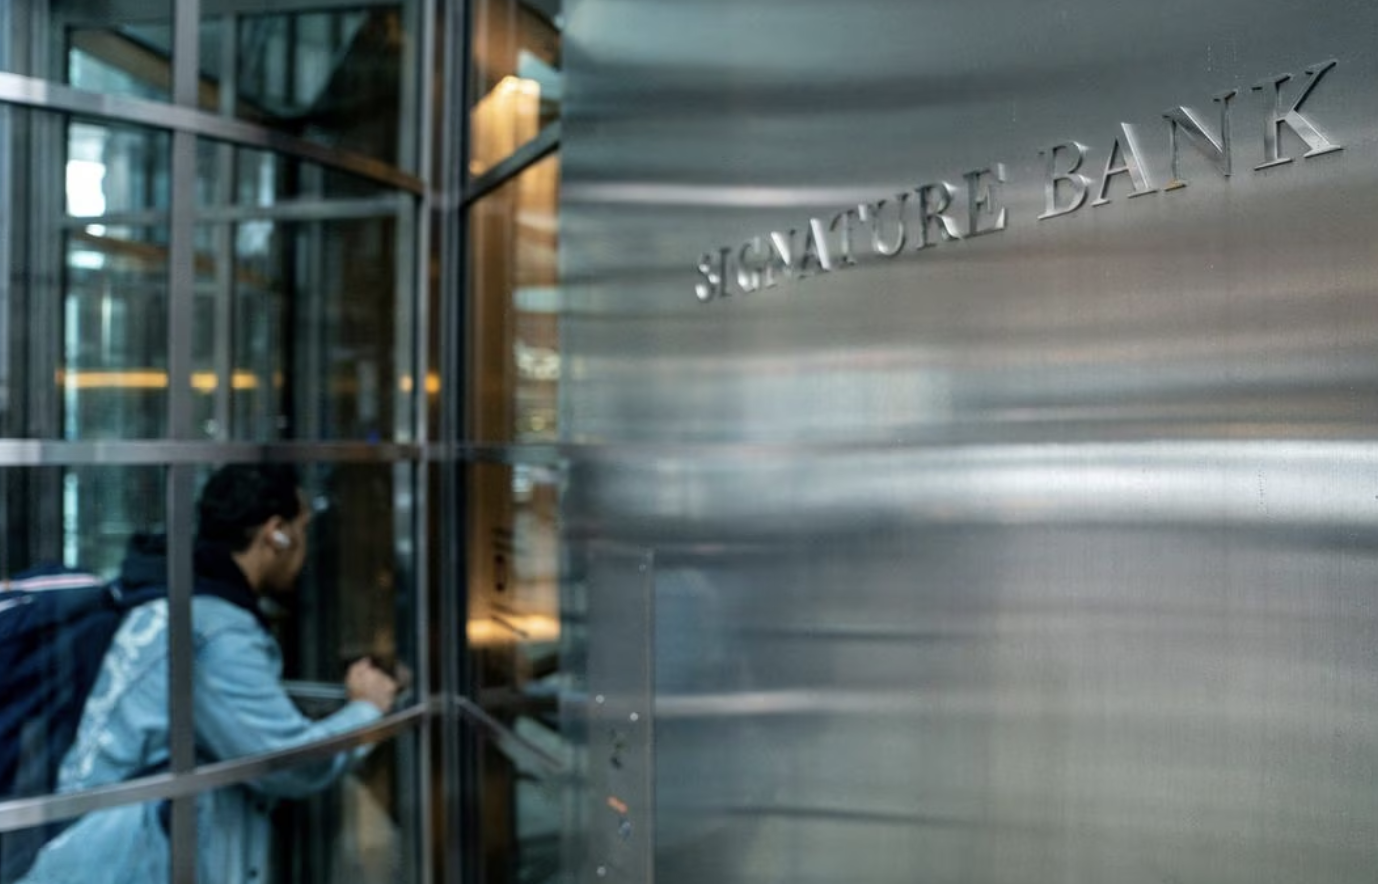 Signature Bank faced criminal probe ahead of its collapse - Bloomberg News